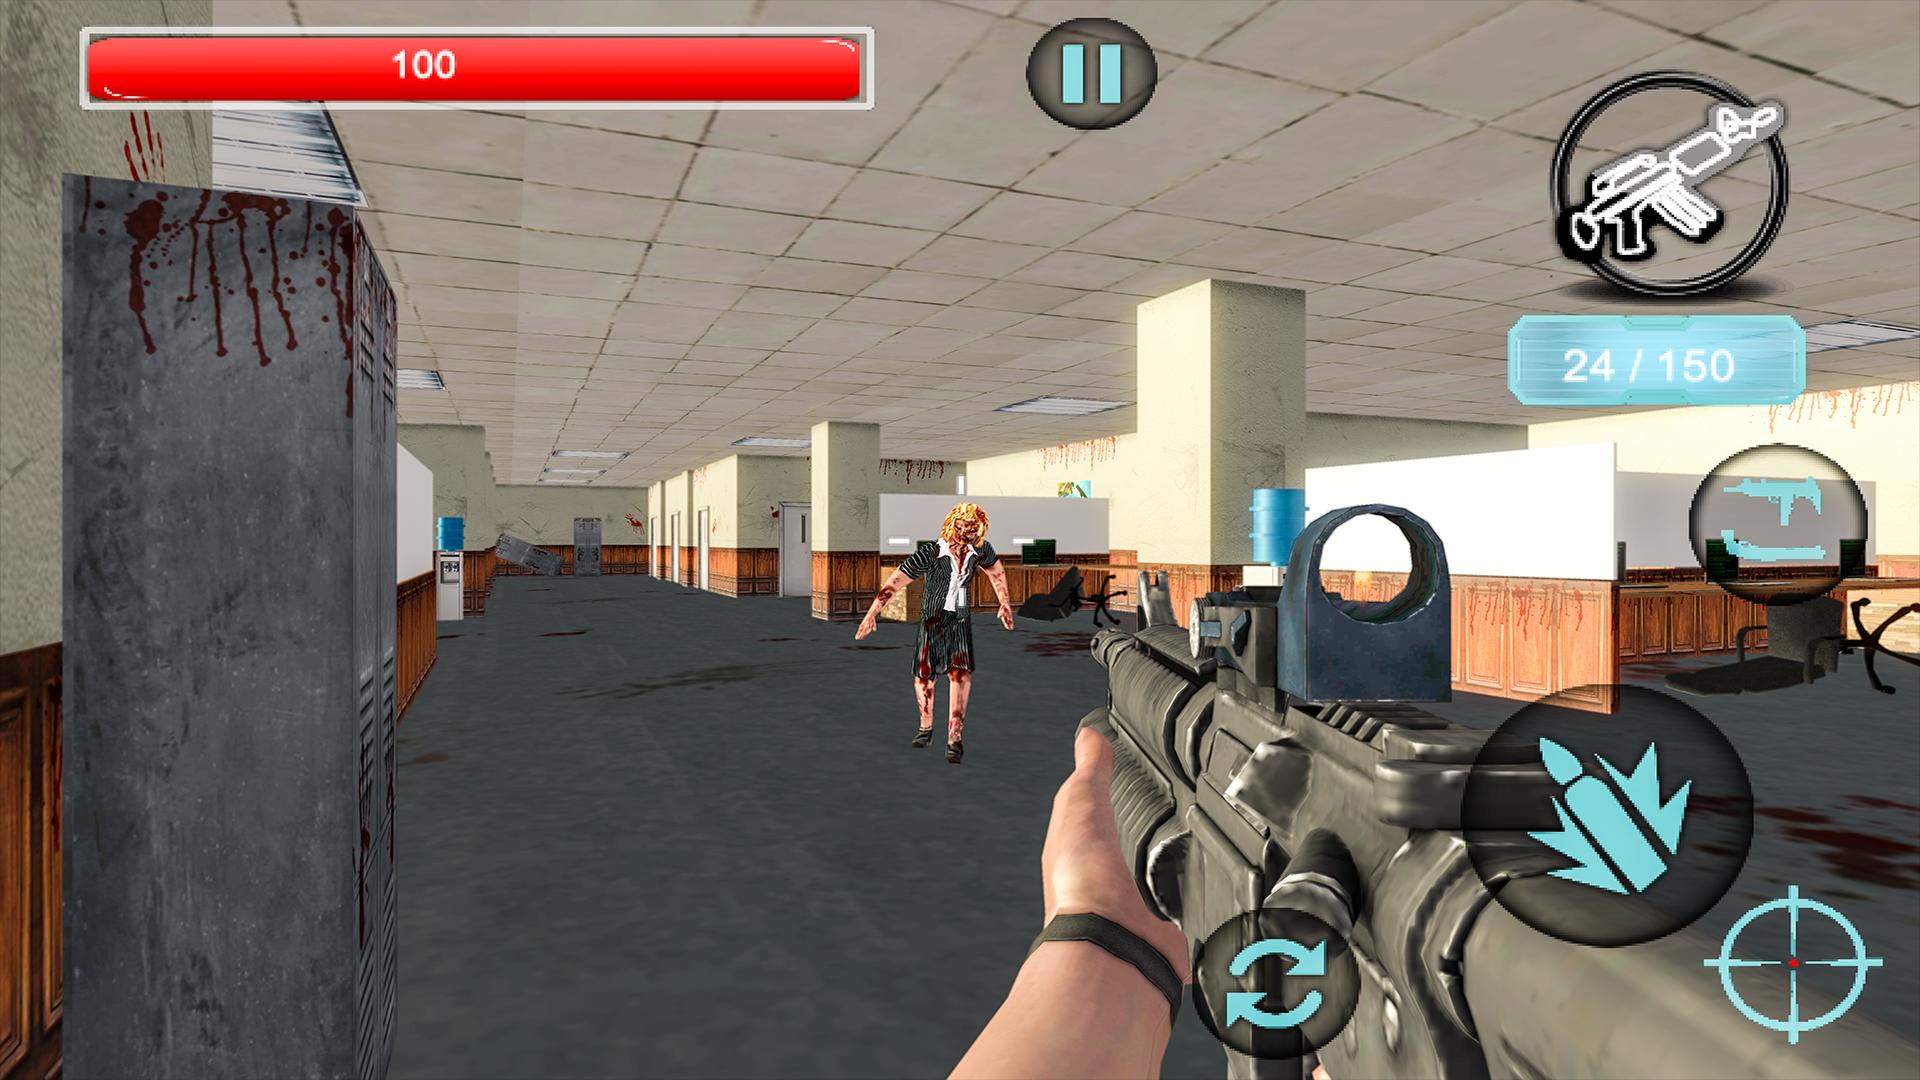 Zombie Encounter for Android - APK Download - 